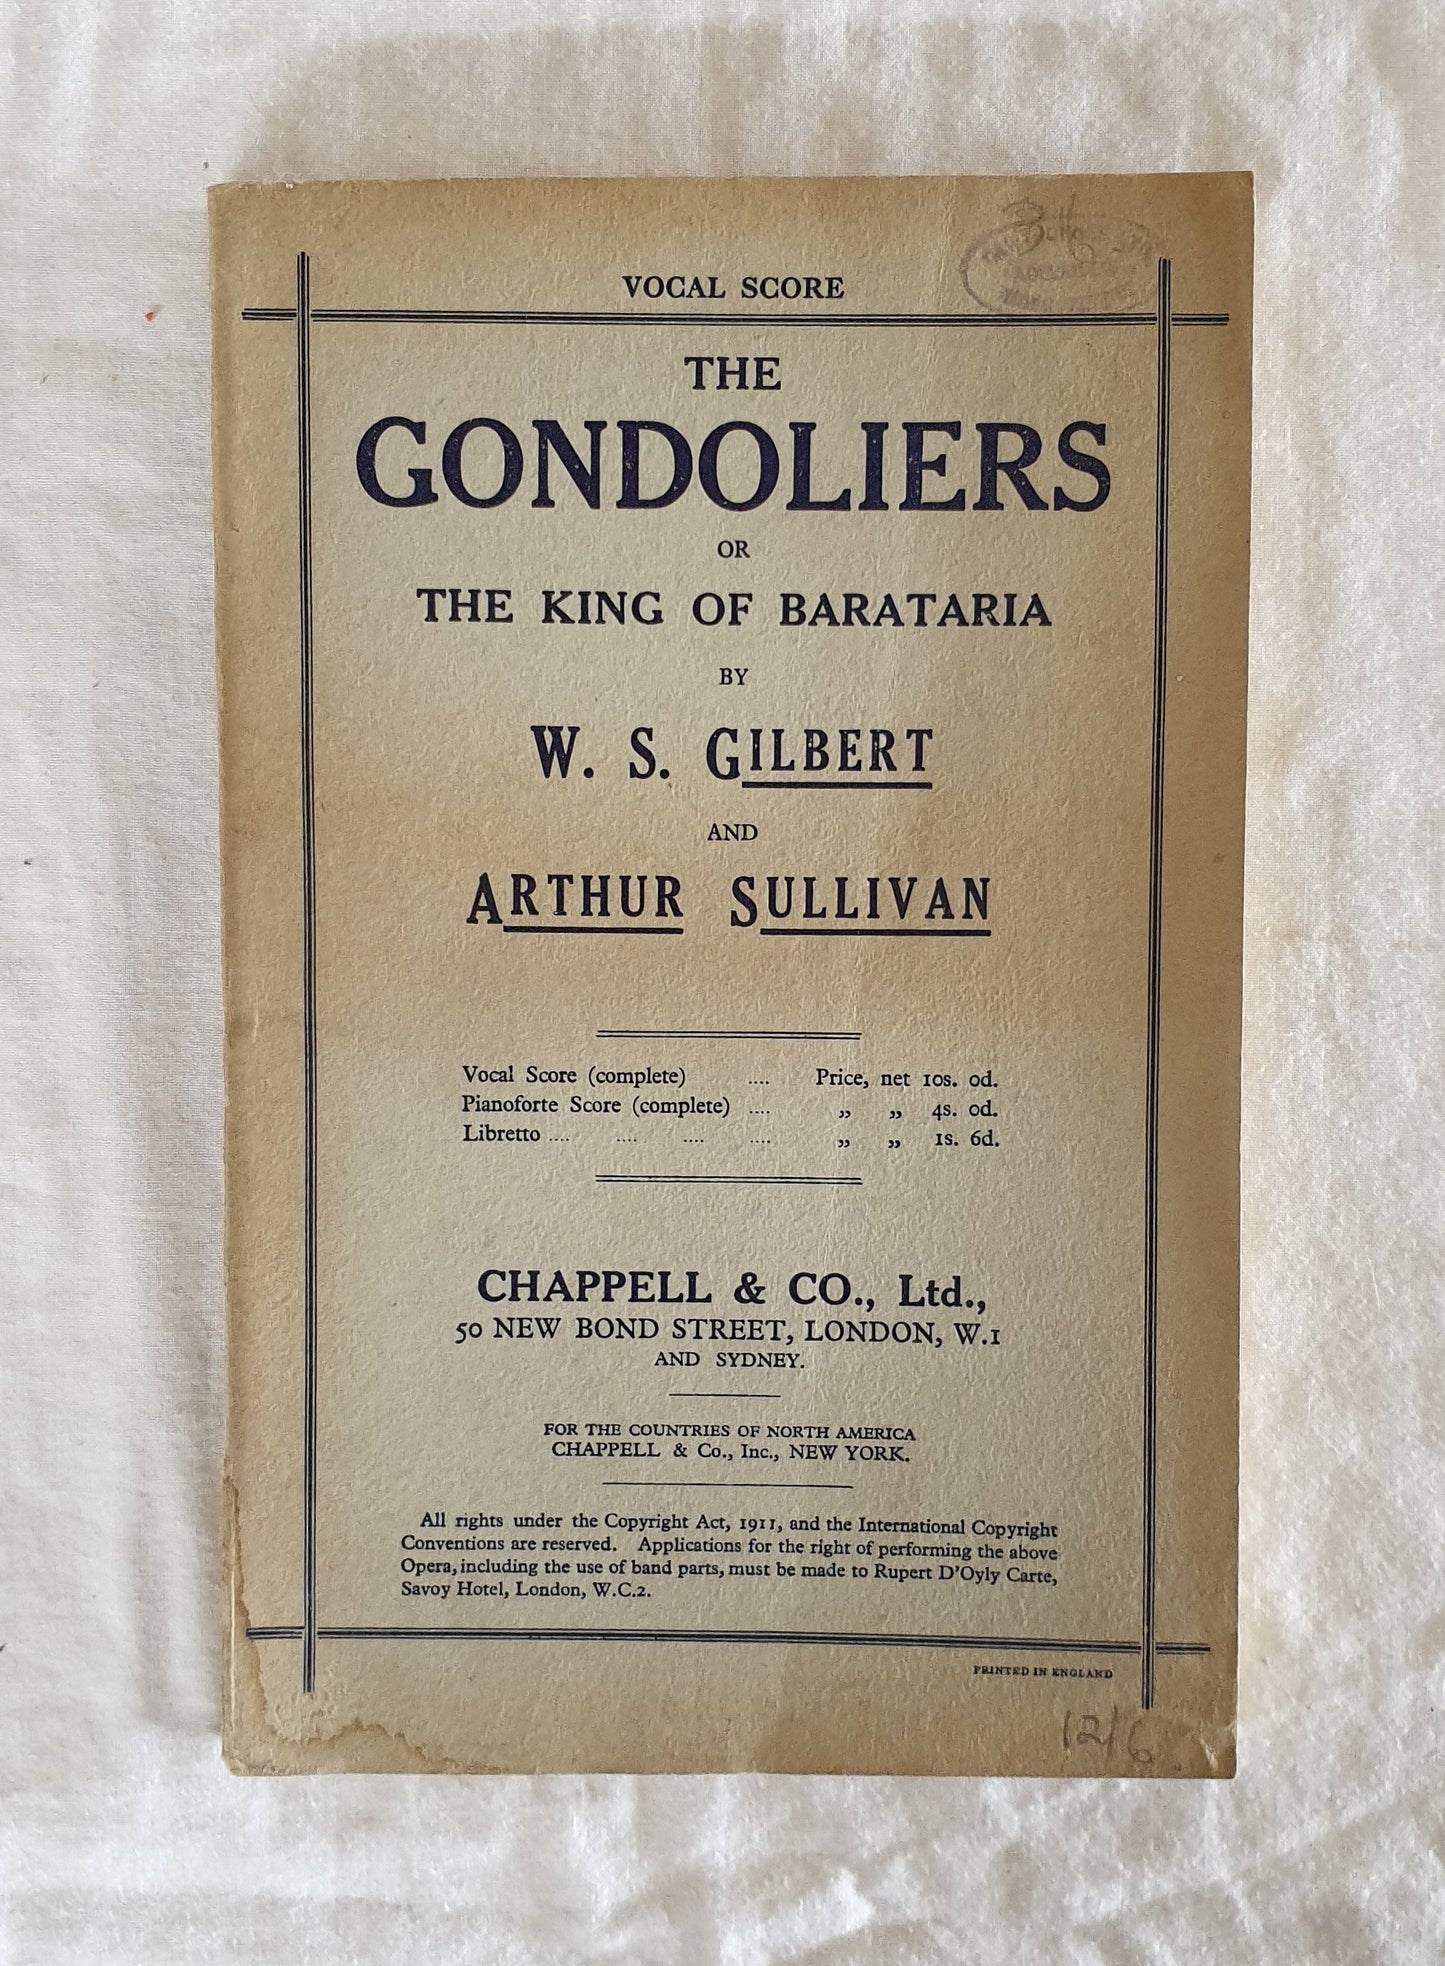 The Gondoliers of The King of Barataria  by W. S. Gilbert and Arthur Sullivan